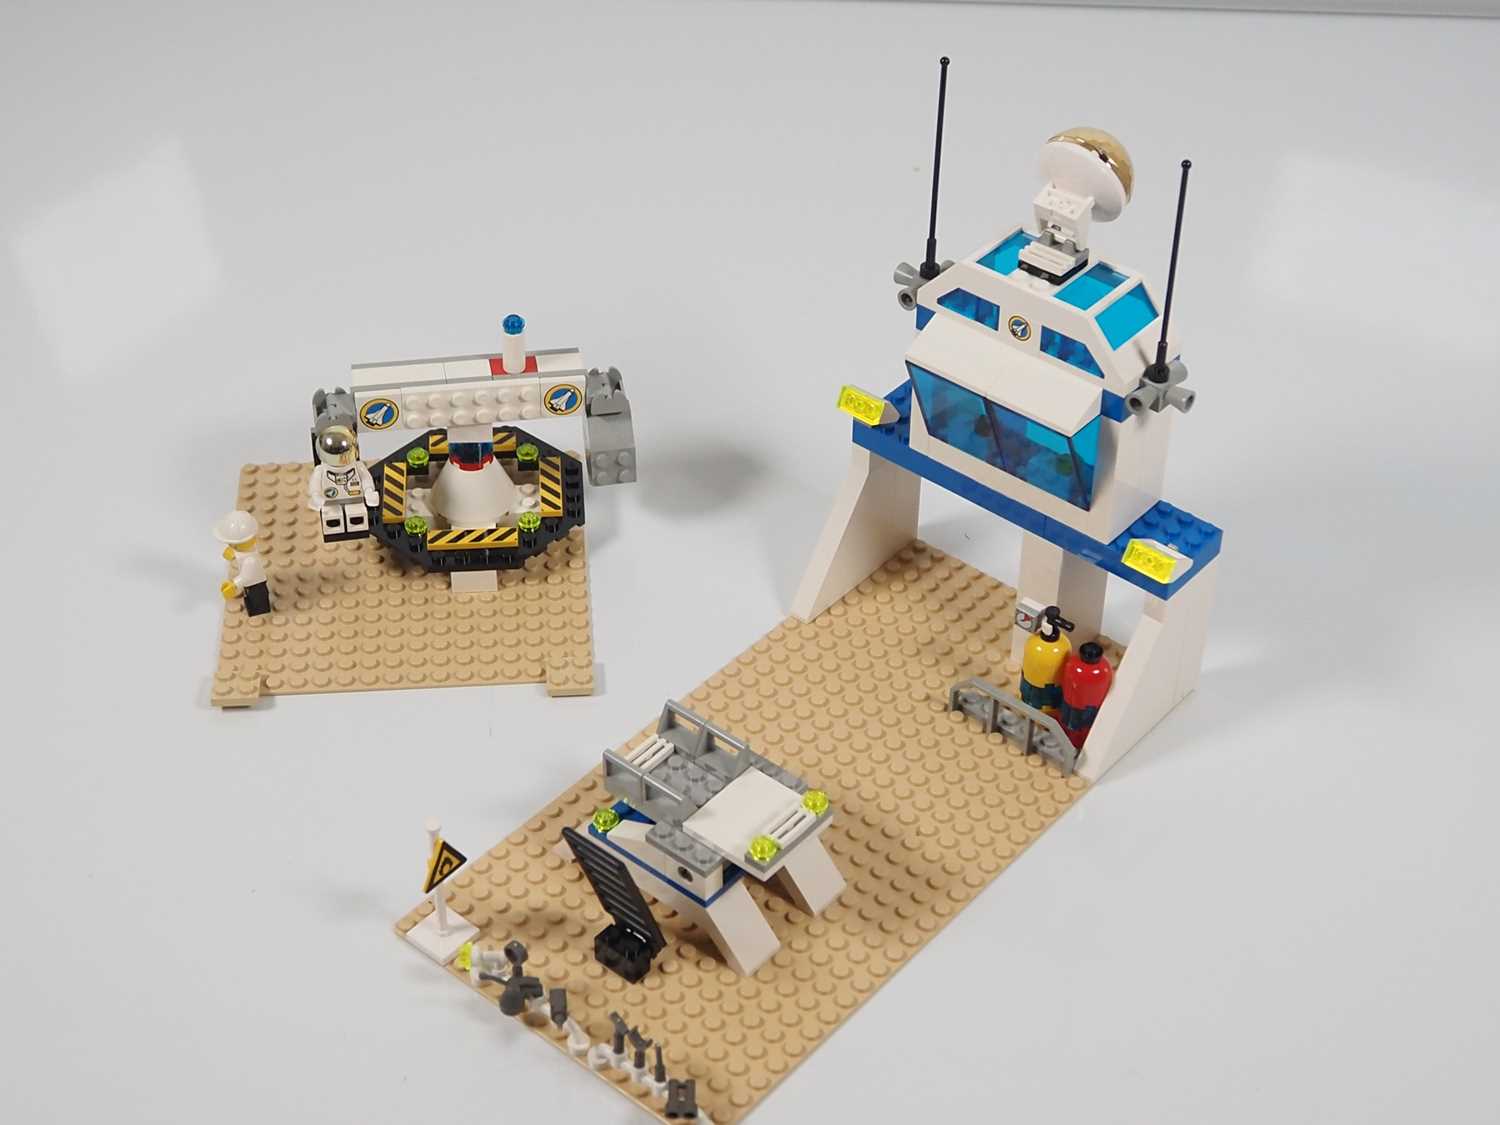 LEGO - TOWN #6455 Space Port - Space Simulation Station - complete with instructions and box - Image 5 of 6